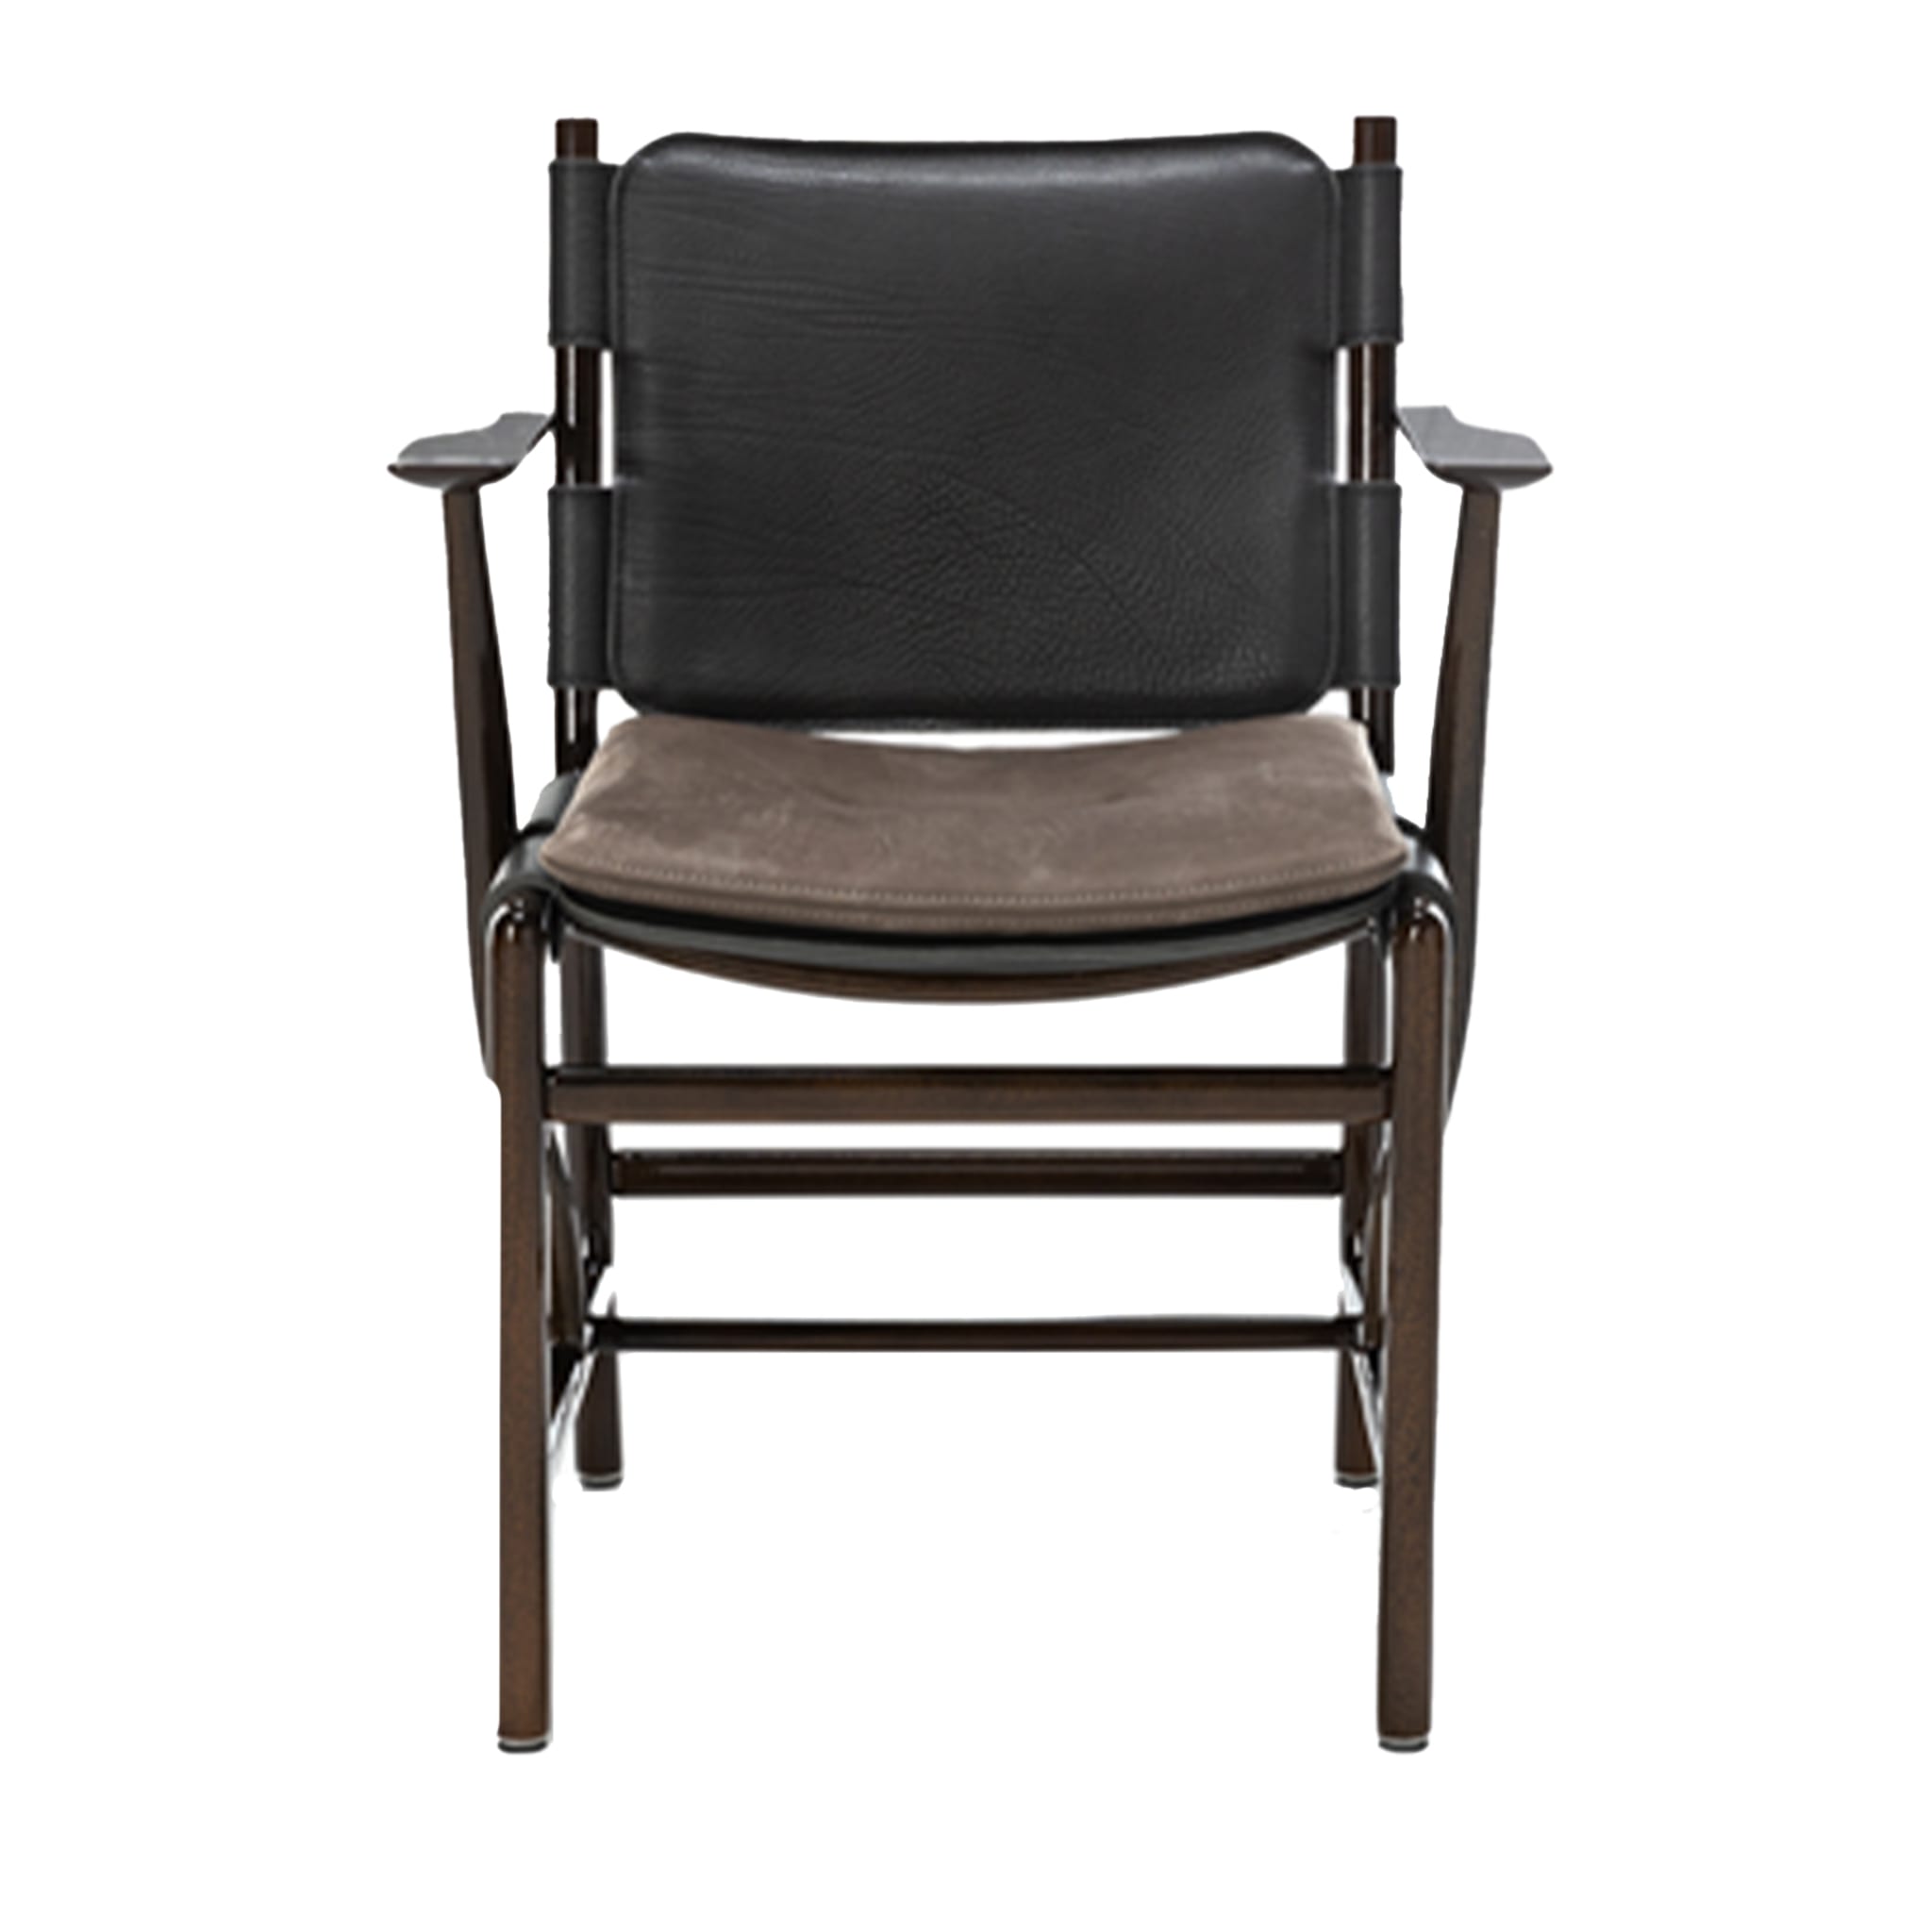 Levante Dark Leather Chair by Massimo Castagna #6 - Main view